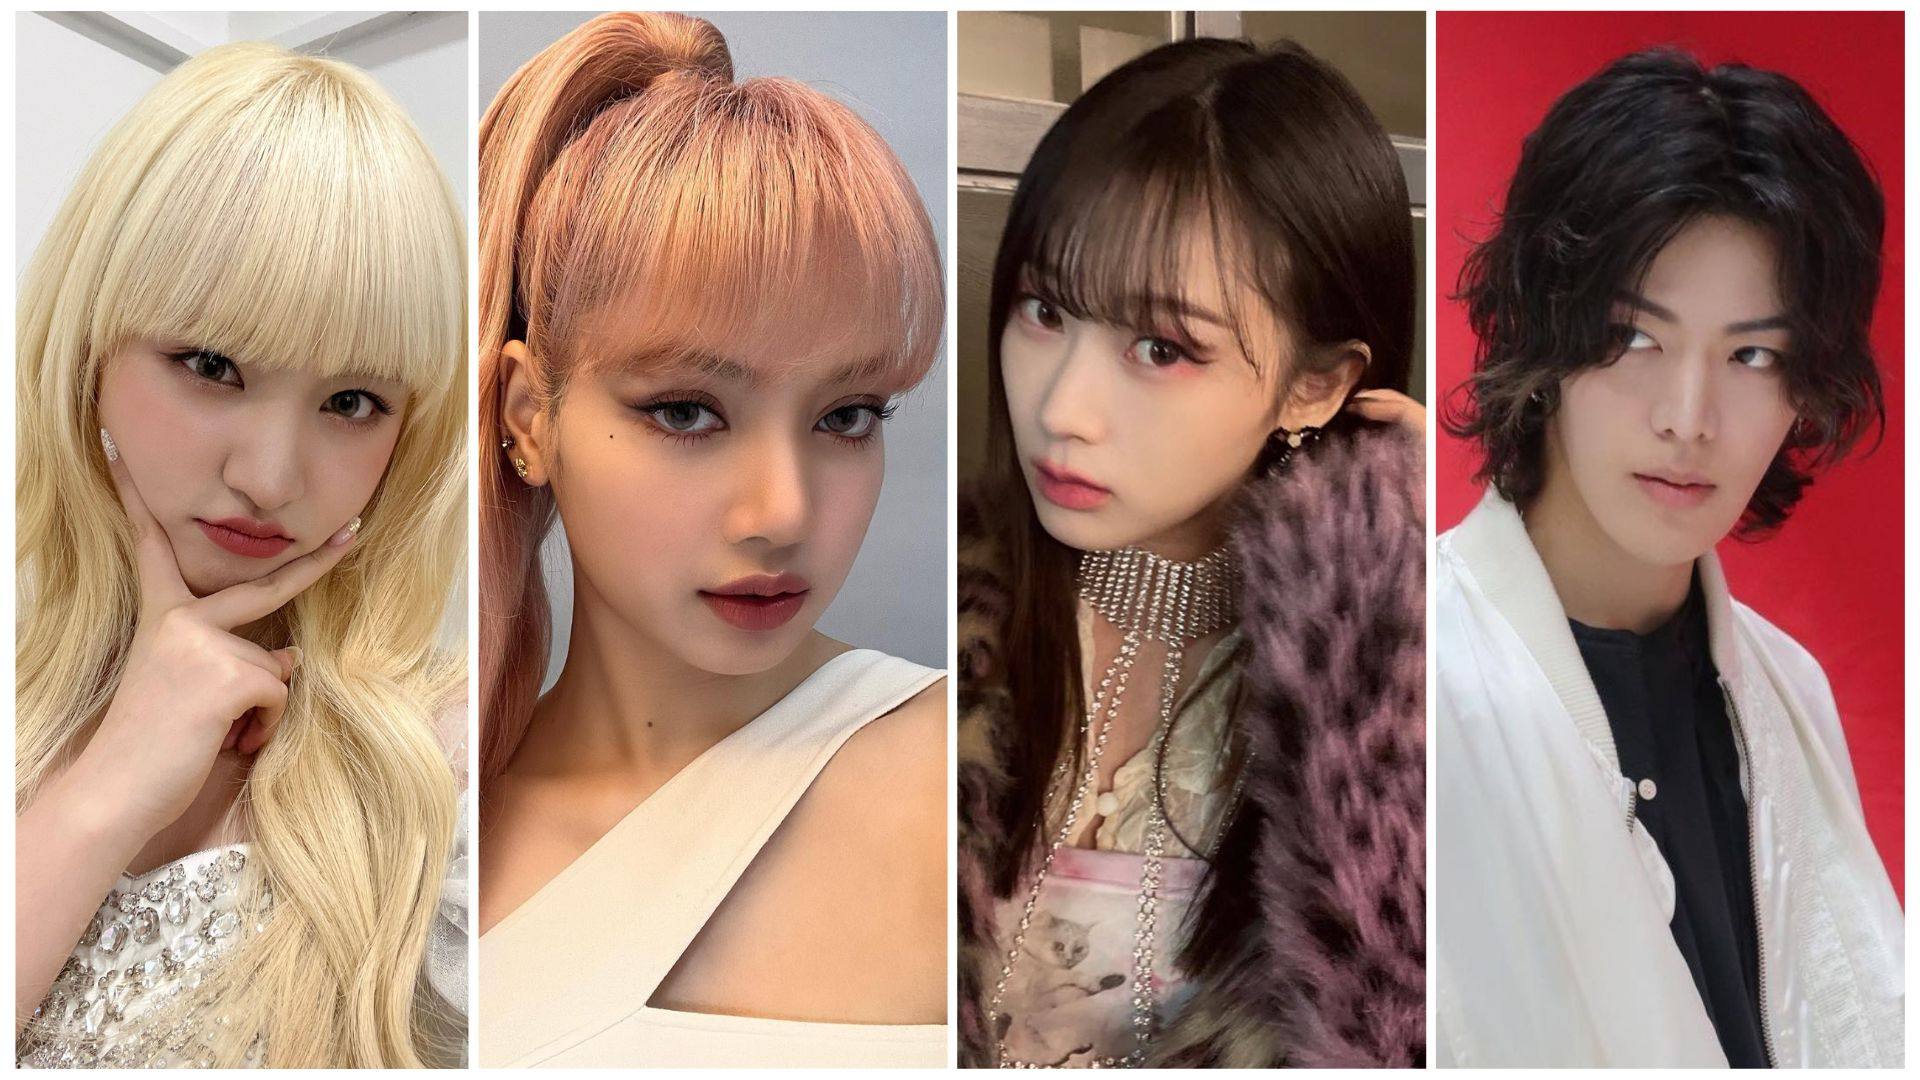 Ive’s Liz, Blackpink’s Lisa, Aespa’s Giselle and NCT’s Yuta have all been seemingly mistreated by their agencies. Photos: @aespa_official, @lalalalisa_m, @liz__ive, @yuu_taa_1026/Instagram